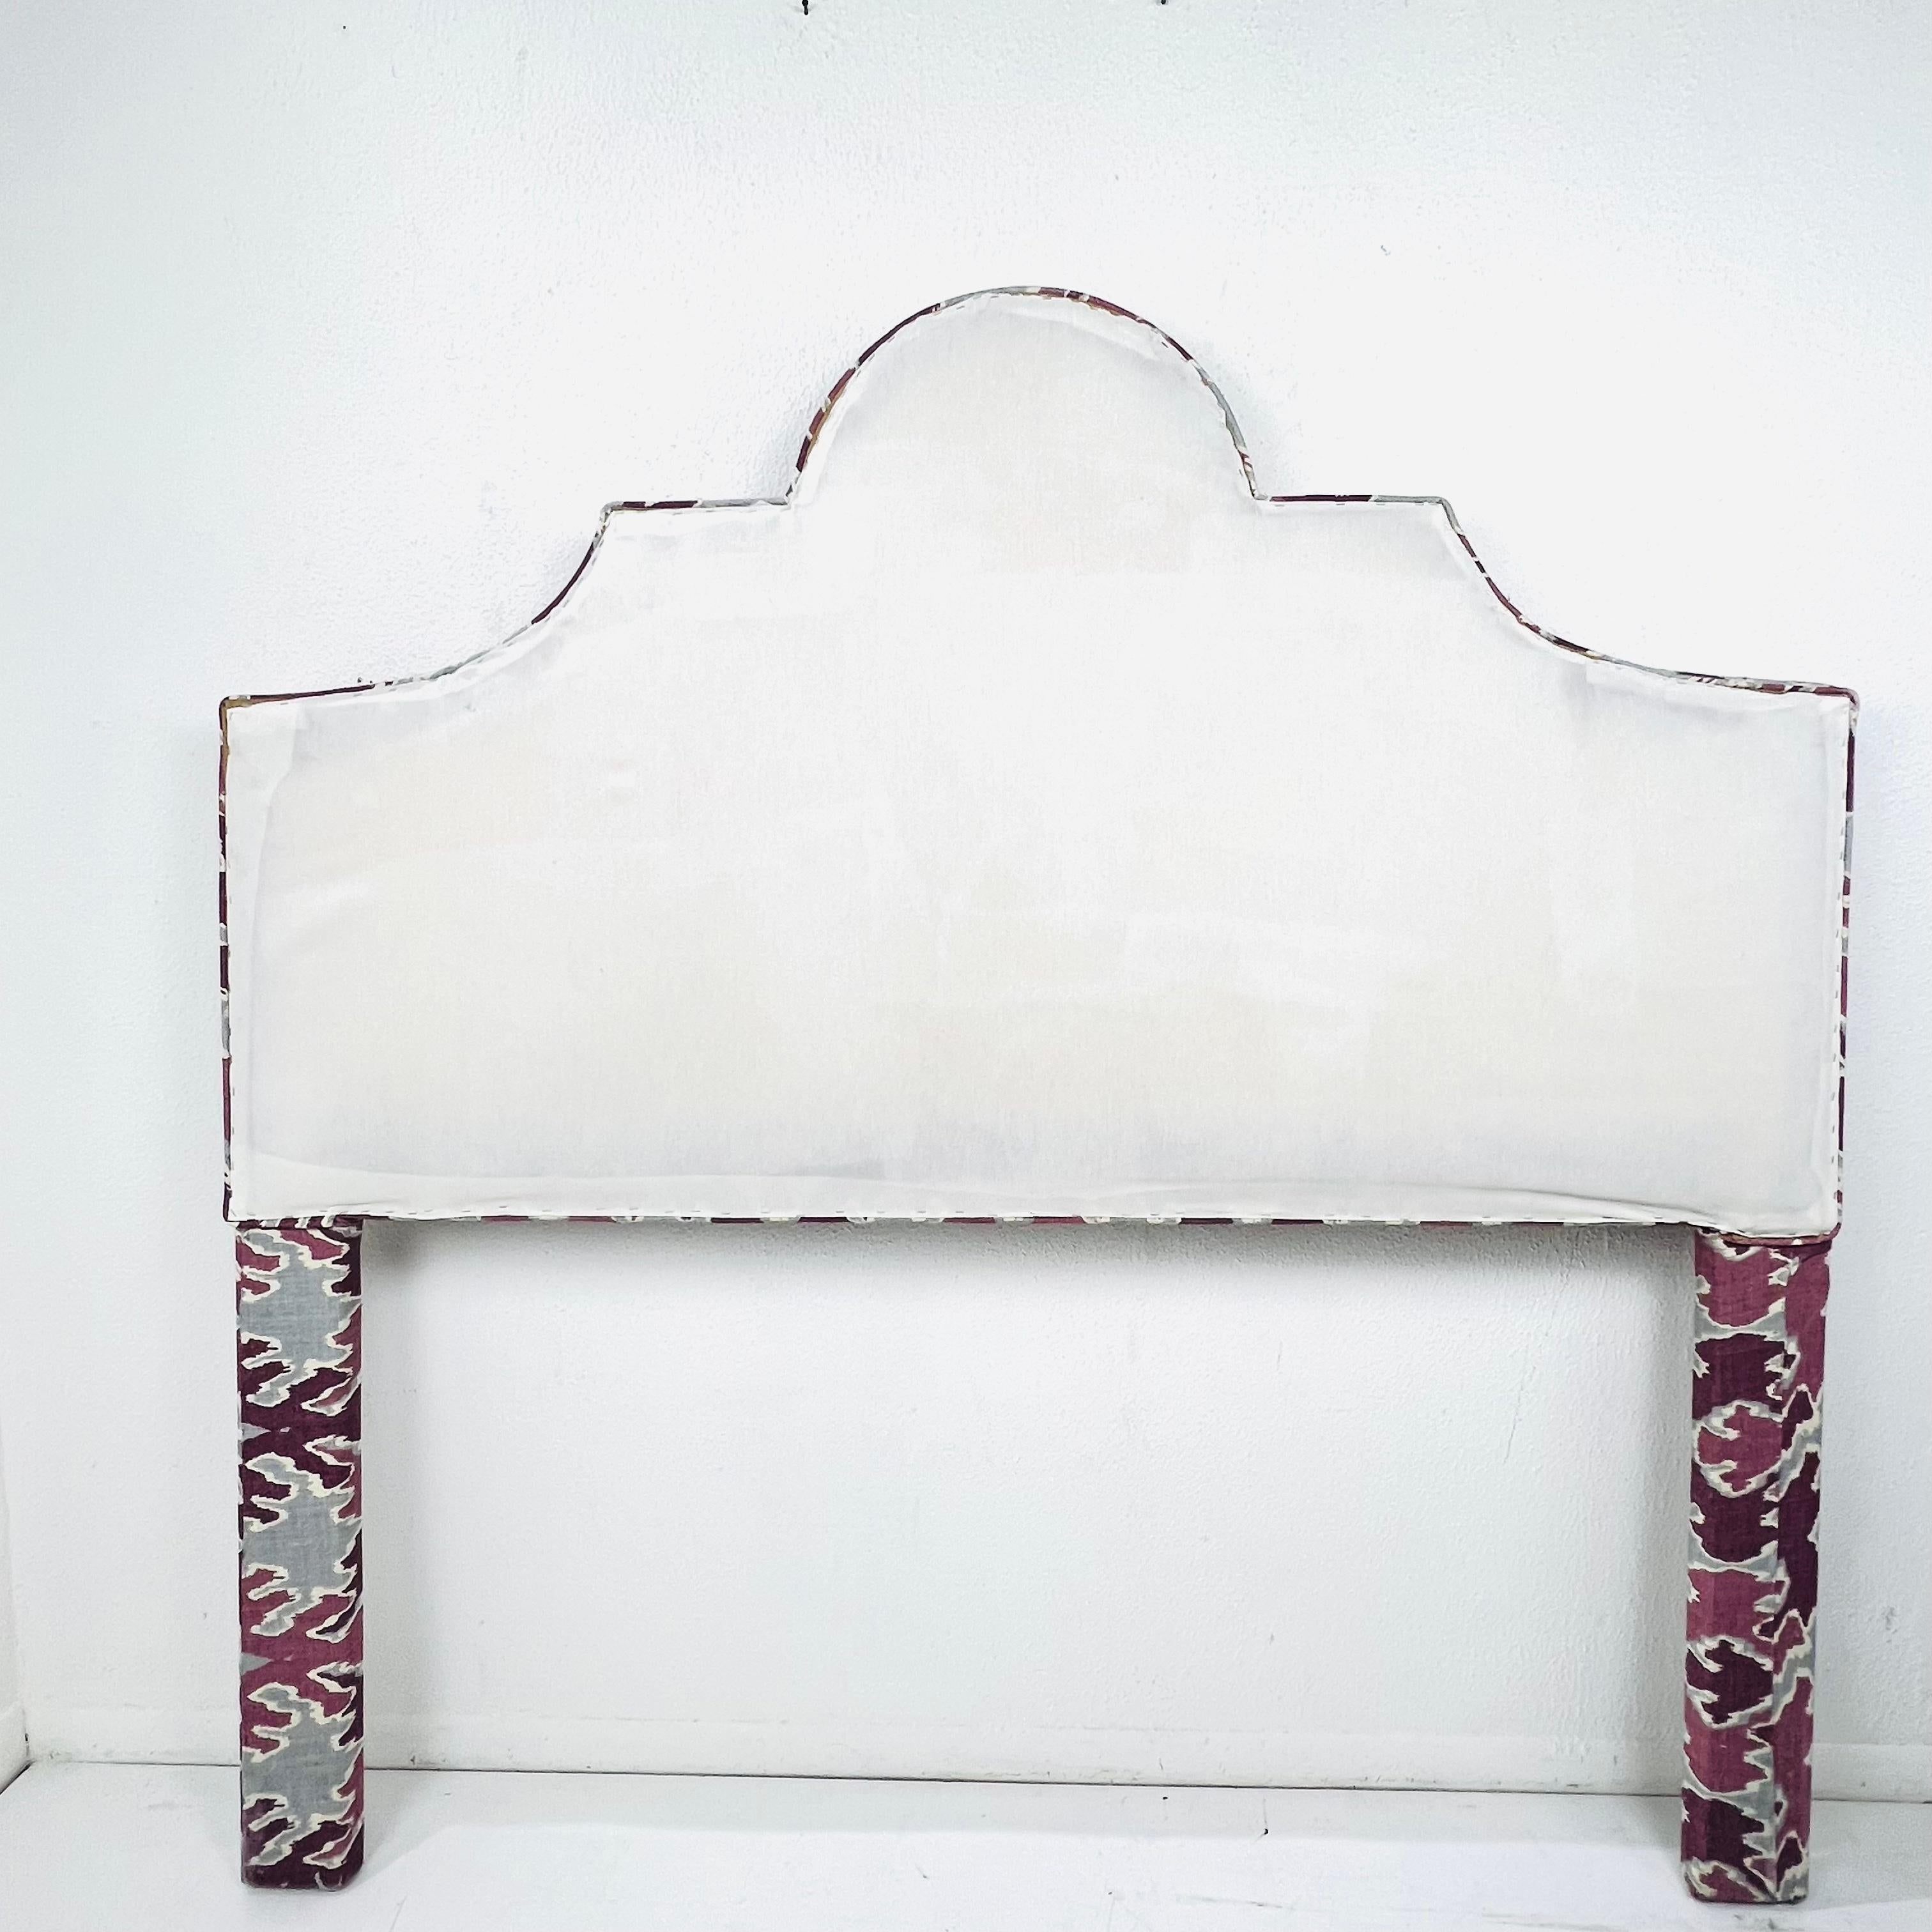 Queen size headboard upohlstered in Lee Jofa Magenta Bengal Bazaar Fabric by Kelly Wearstler.  Portman shaped curved frame. Both frame and upholstery in good condition.